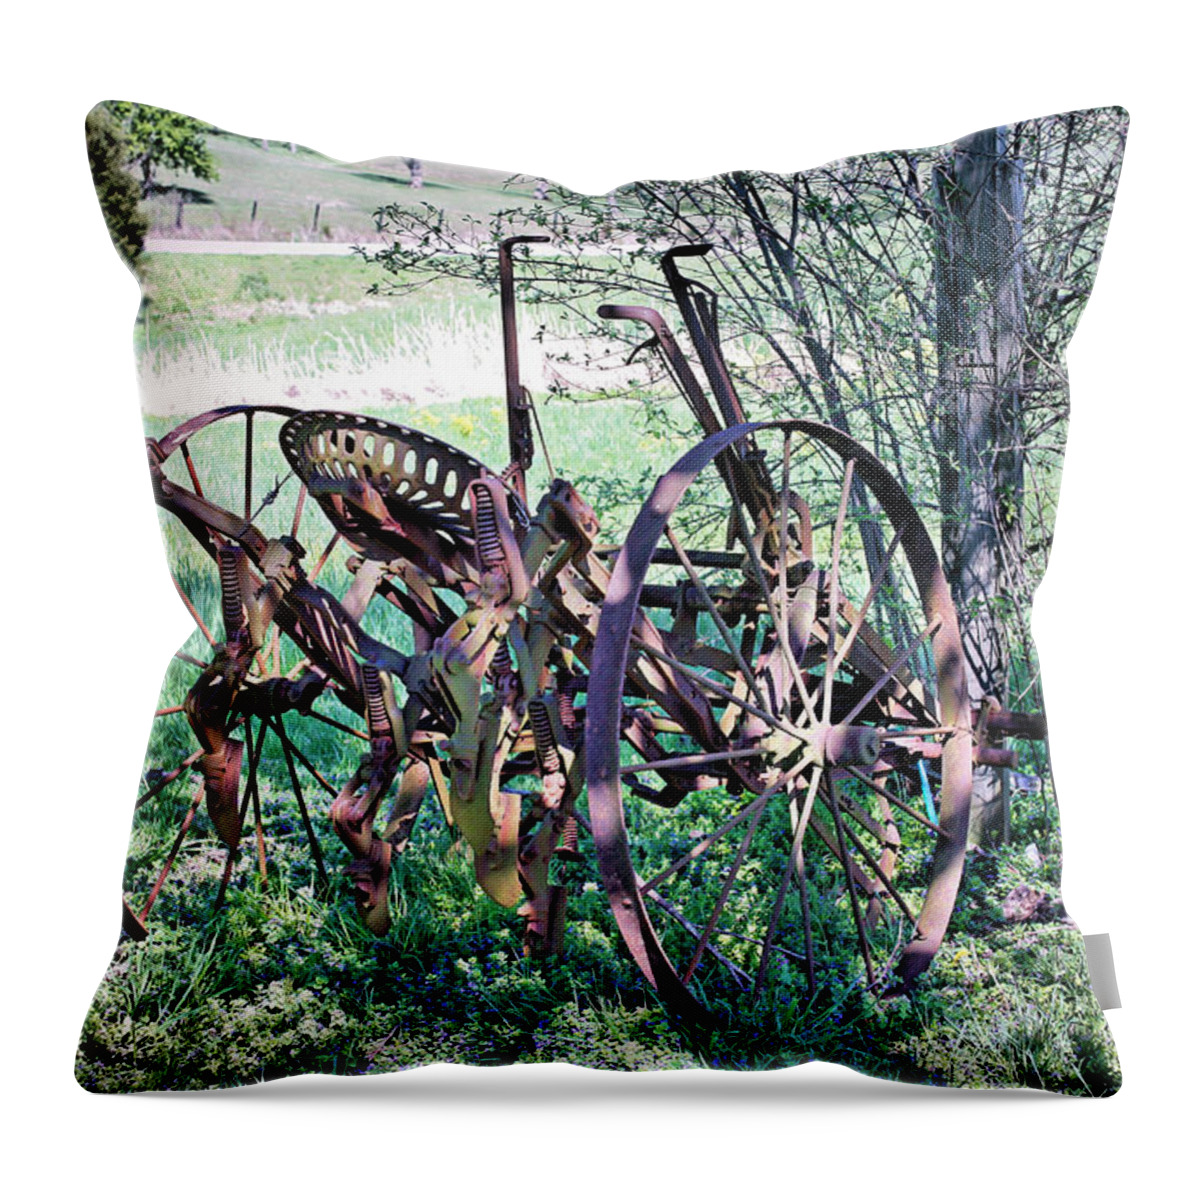 Plow Throw Pillow featuring the photograph Plowed Out by Kristin Elmquist